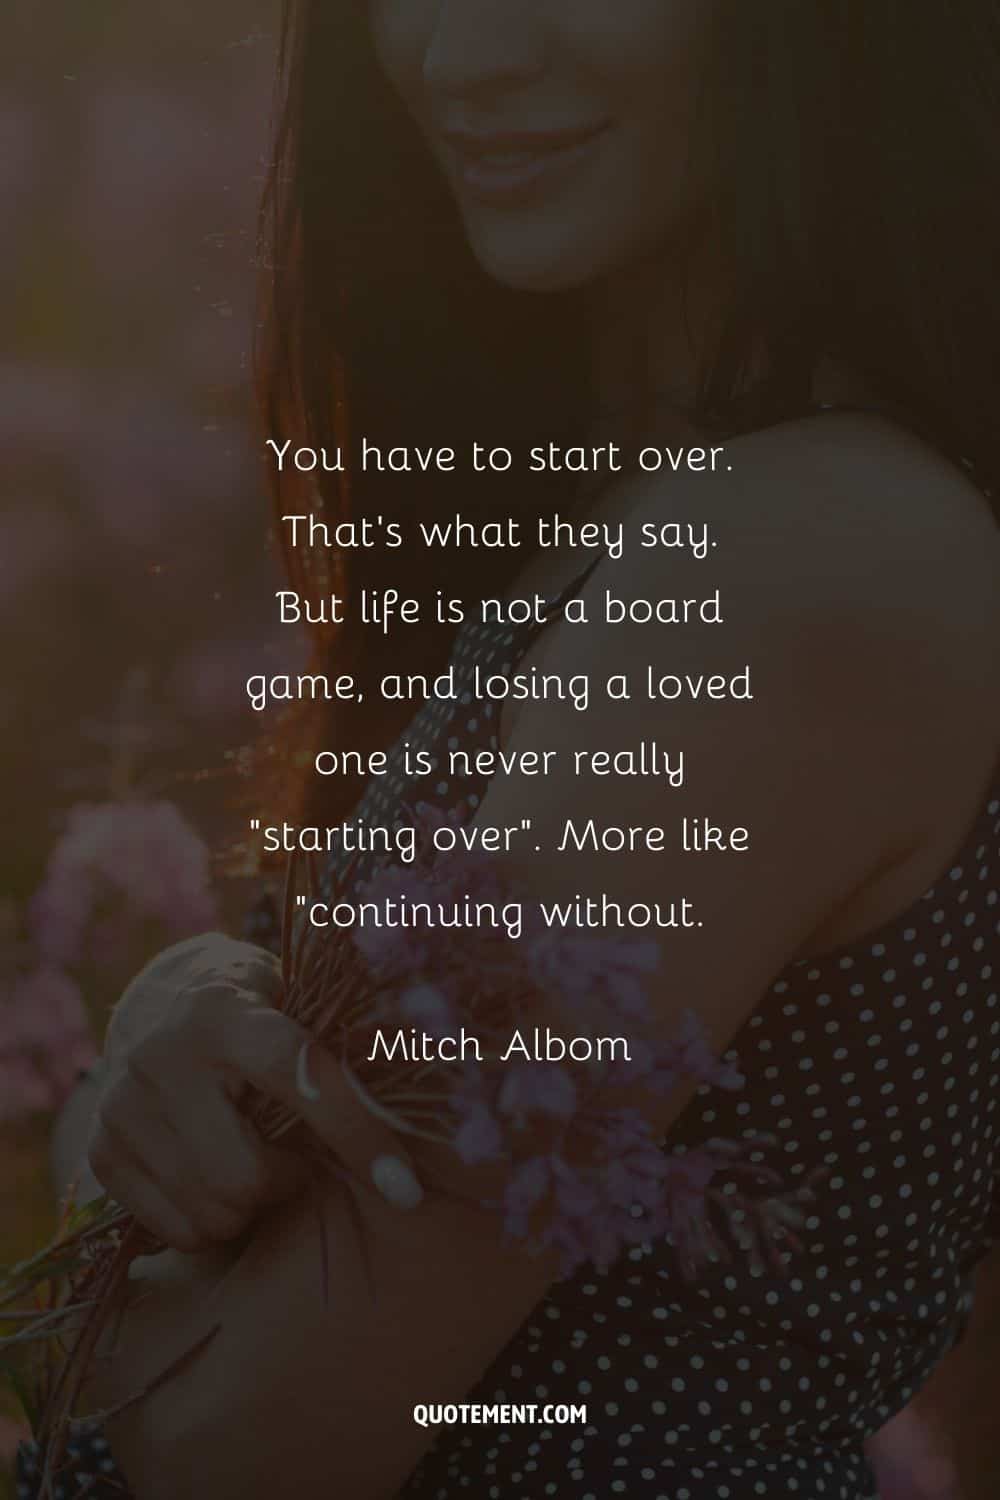 “You have to start over. That’s what they say. But life is not a board game, and losing a loved one is never really “starting over”. More like “continuing without.” — Mitch Albom